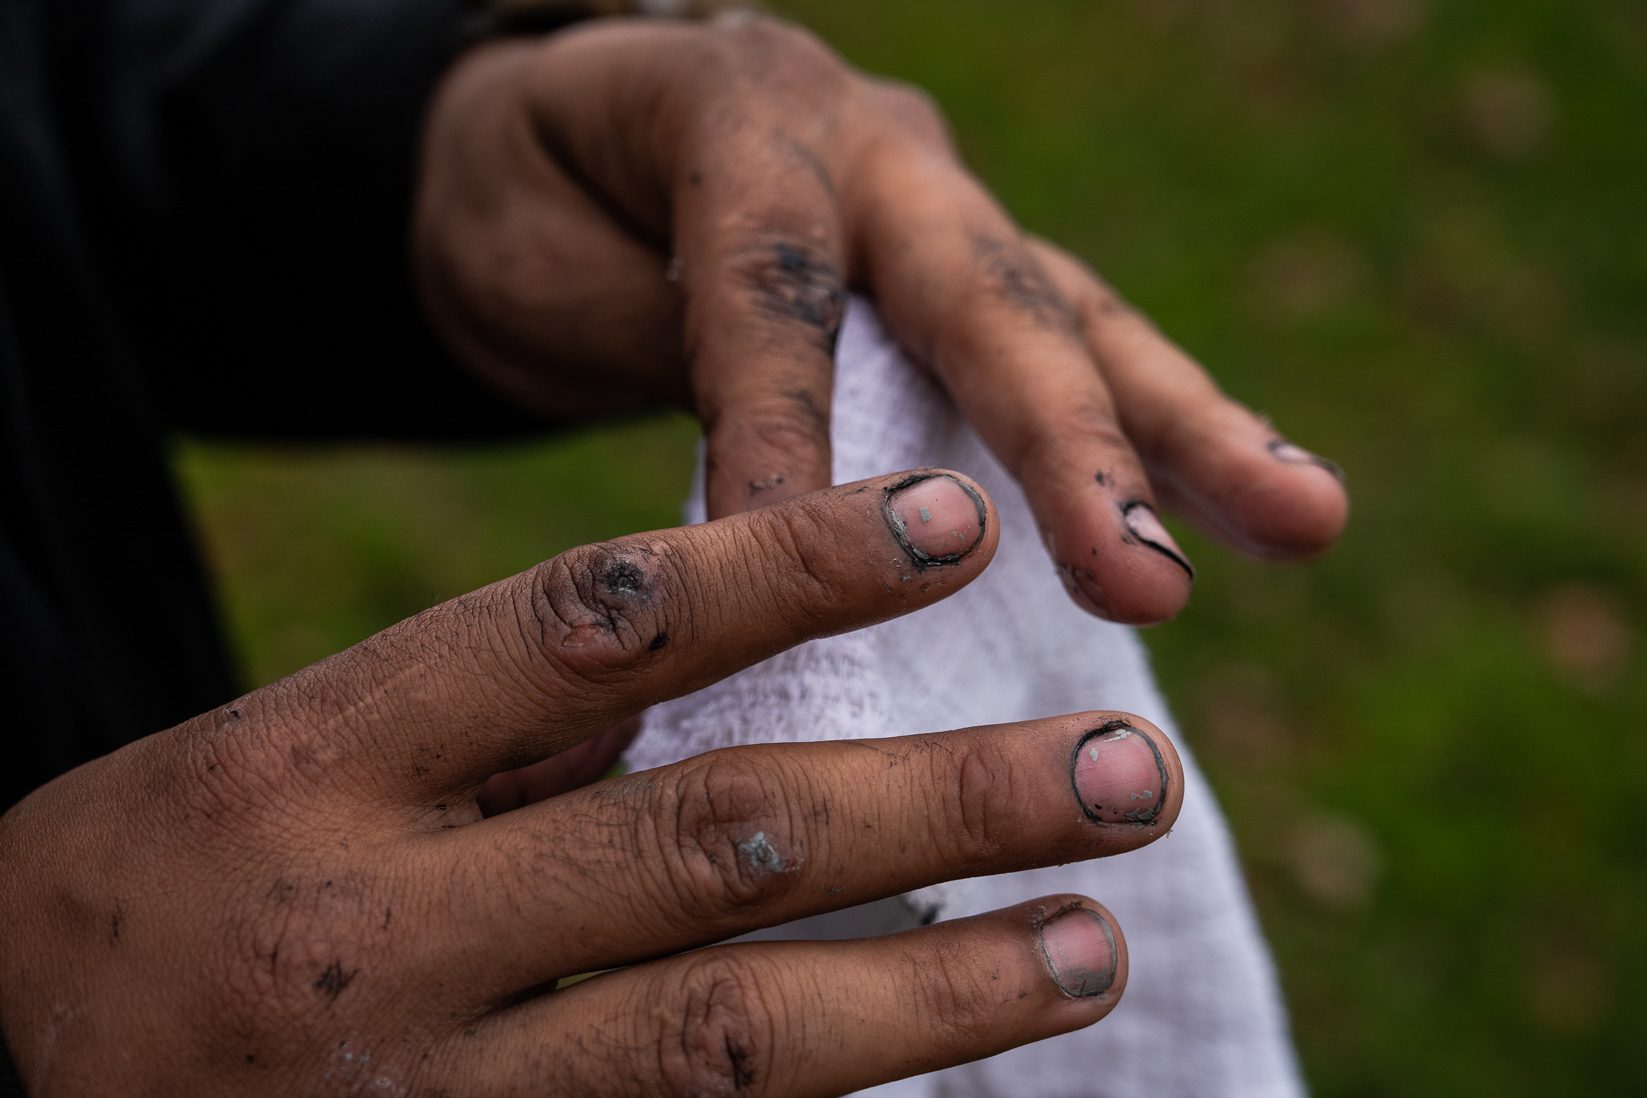 dark paint shown on Nolram's hands with grass in the background